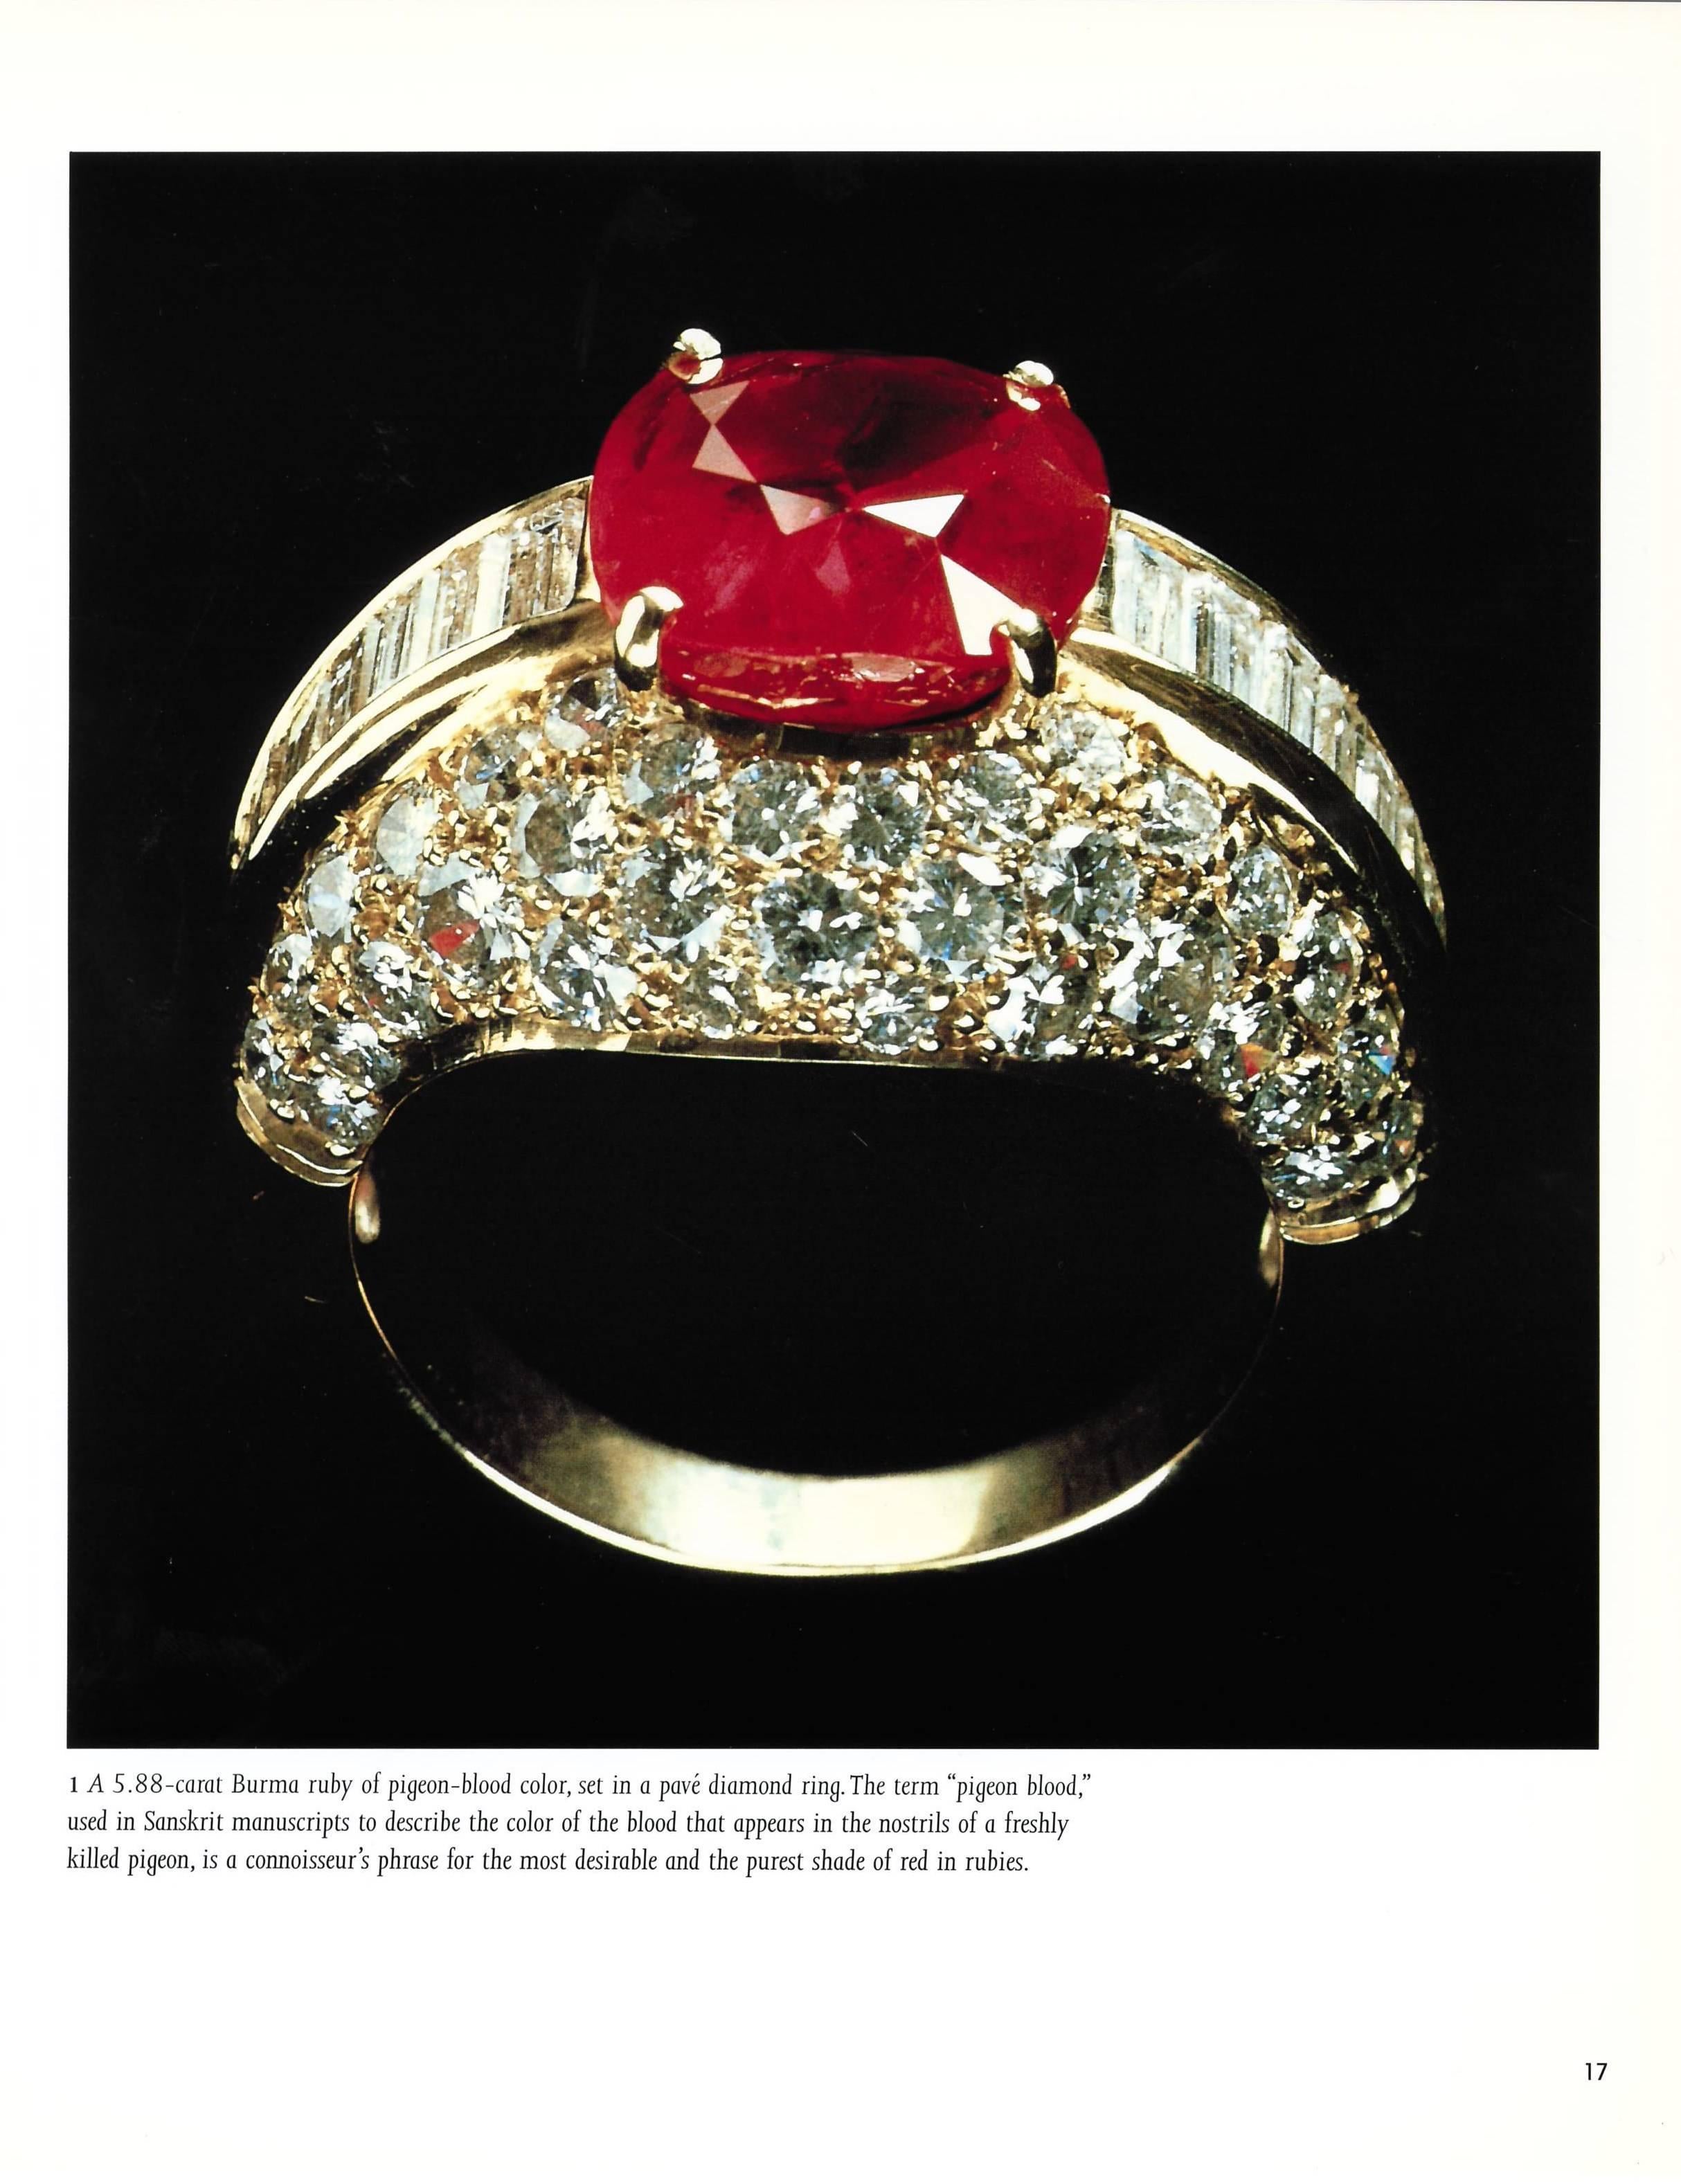 This book is a comprehensive survey of the history and uses of the principal types of gems, and provides an insight into their origins, methods and styles of cutting at different times in history, and the aesthetic appeal of numerous examples of the